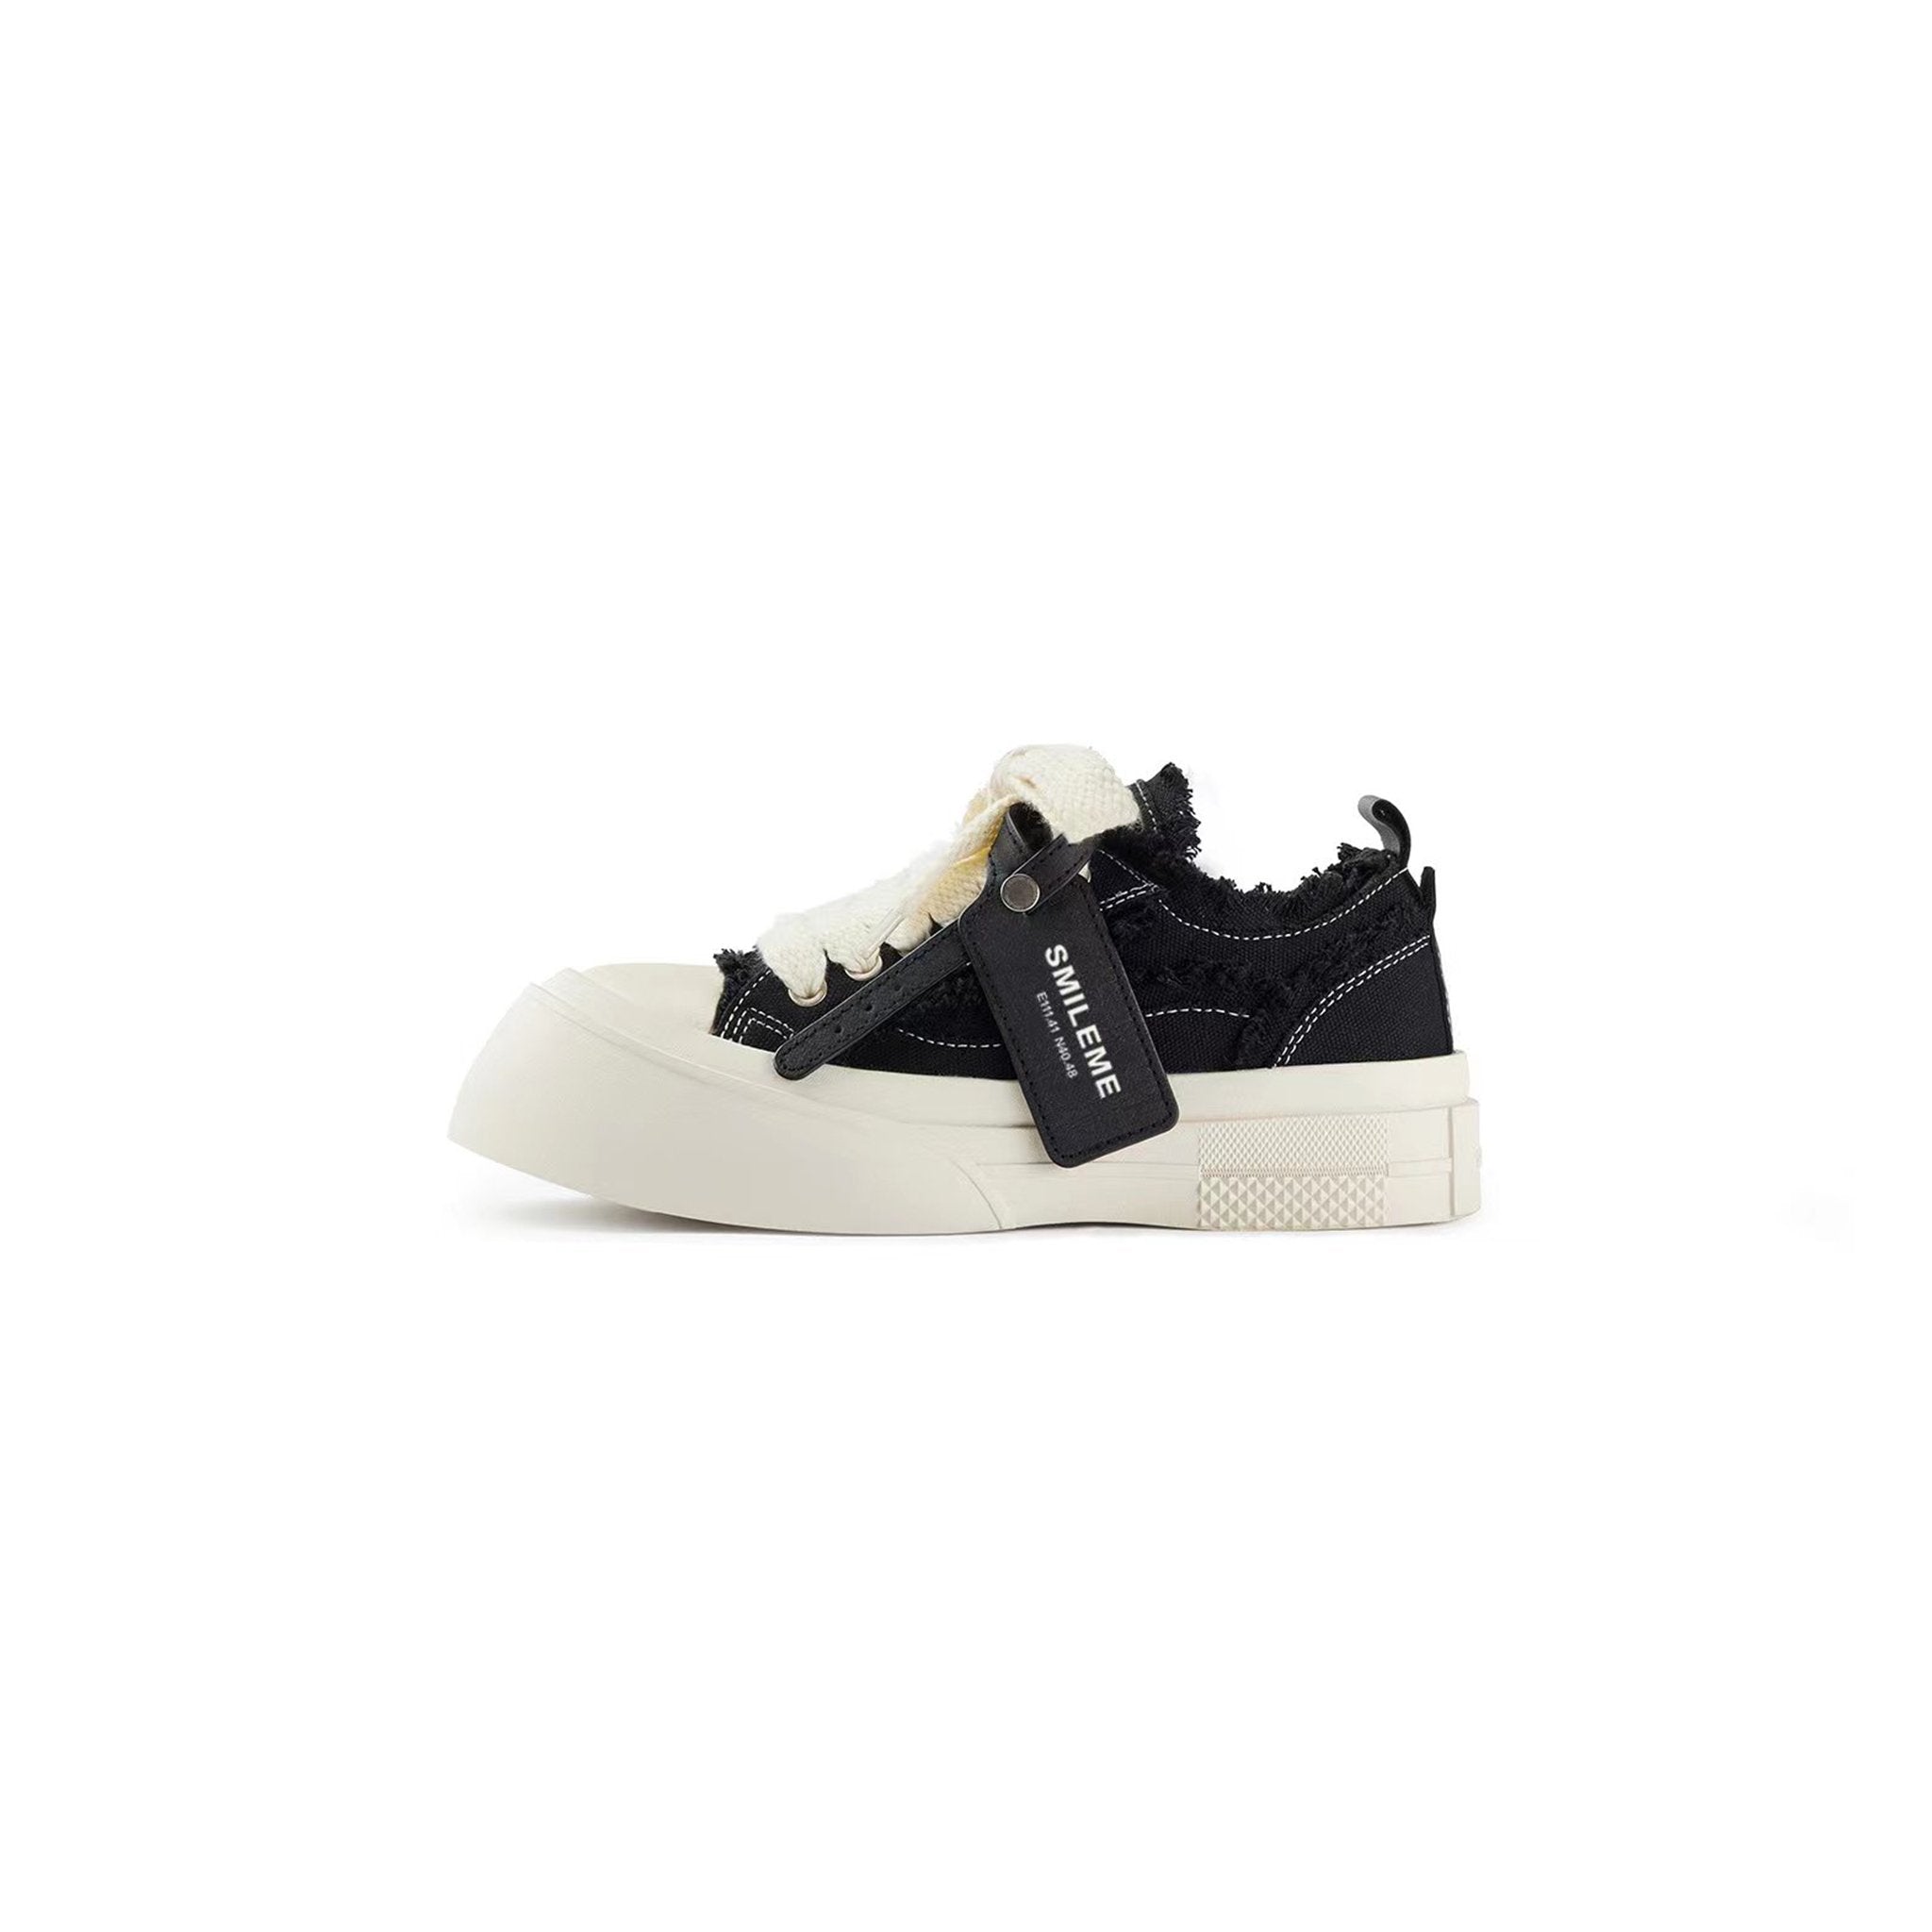 Smileme Future Star Black Canvas Shoes | MADA IN CHINA